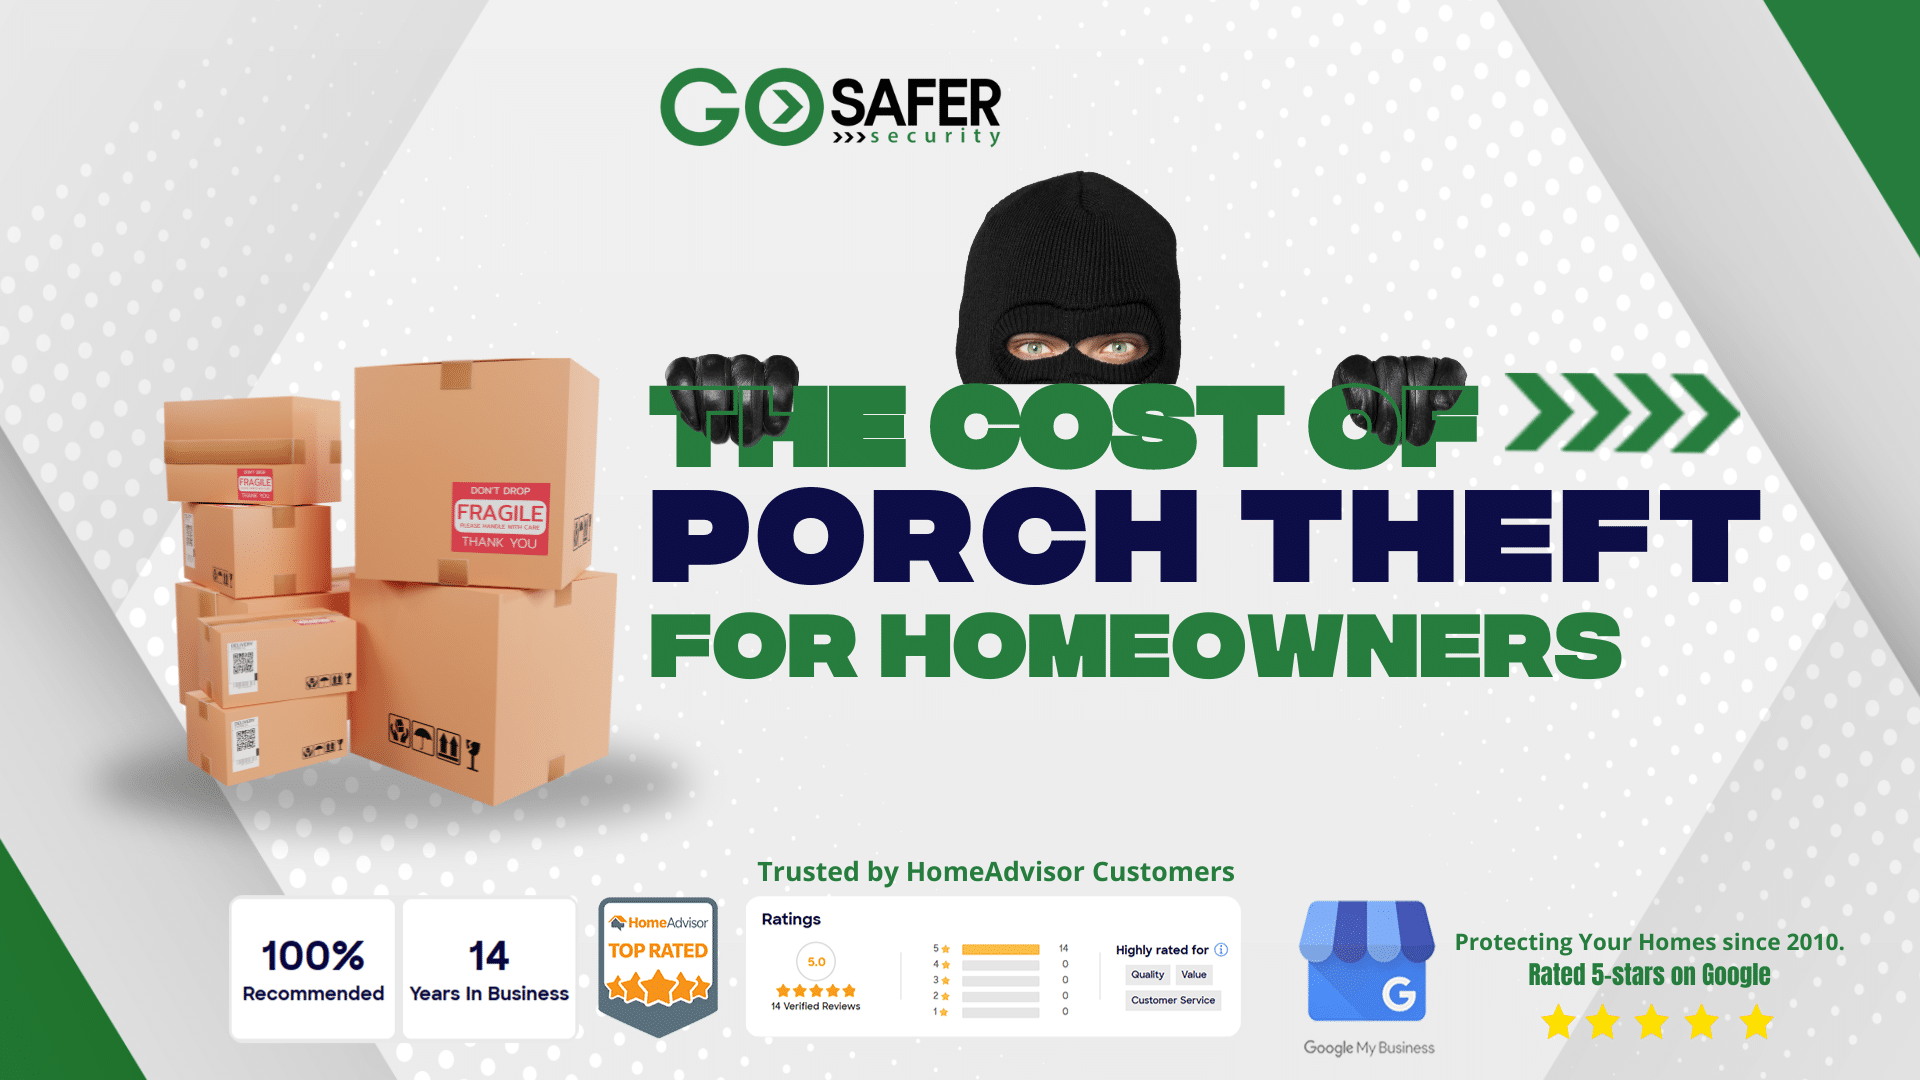 The Top 4 Cost of Porch Theft for Homeowners